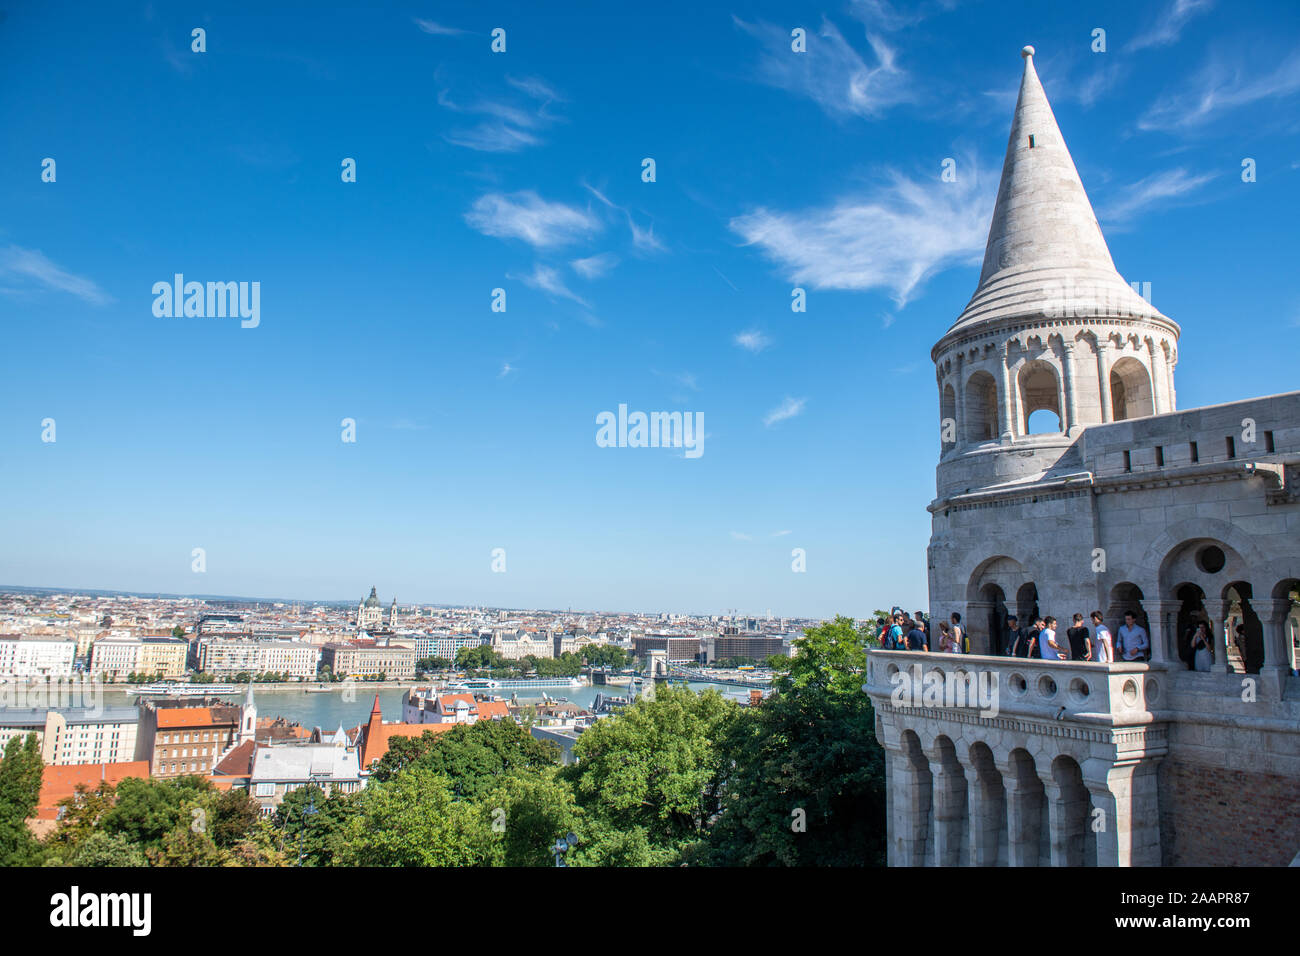 The panoramic view of the Budapest skyline from the balconies and terraces of the Halaszbastya (Fishermans Bastion), Budapest, Hungary. Budapest, Hung Stock Photo